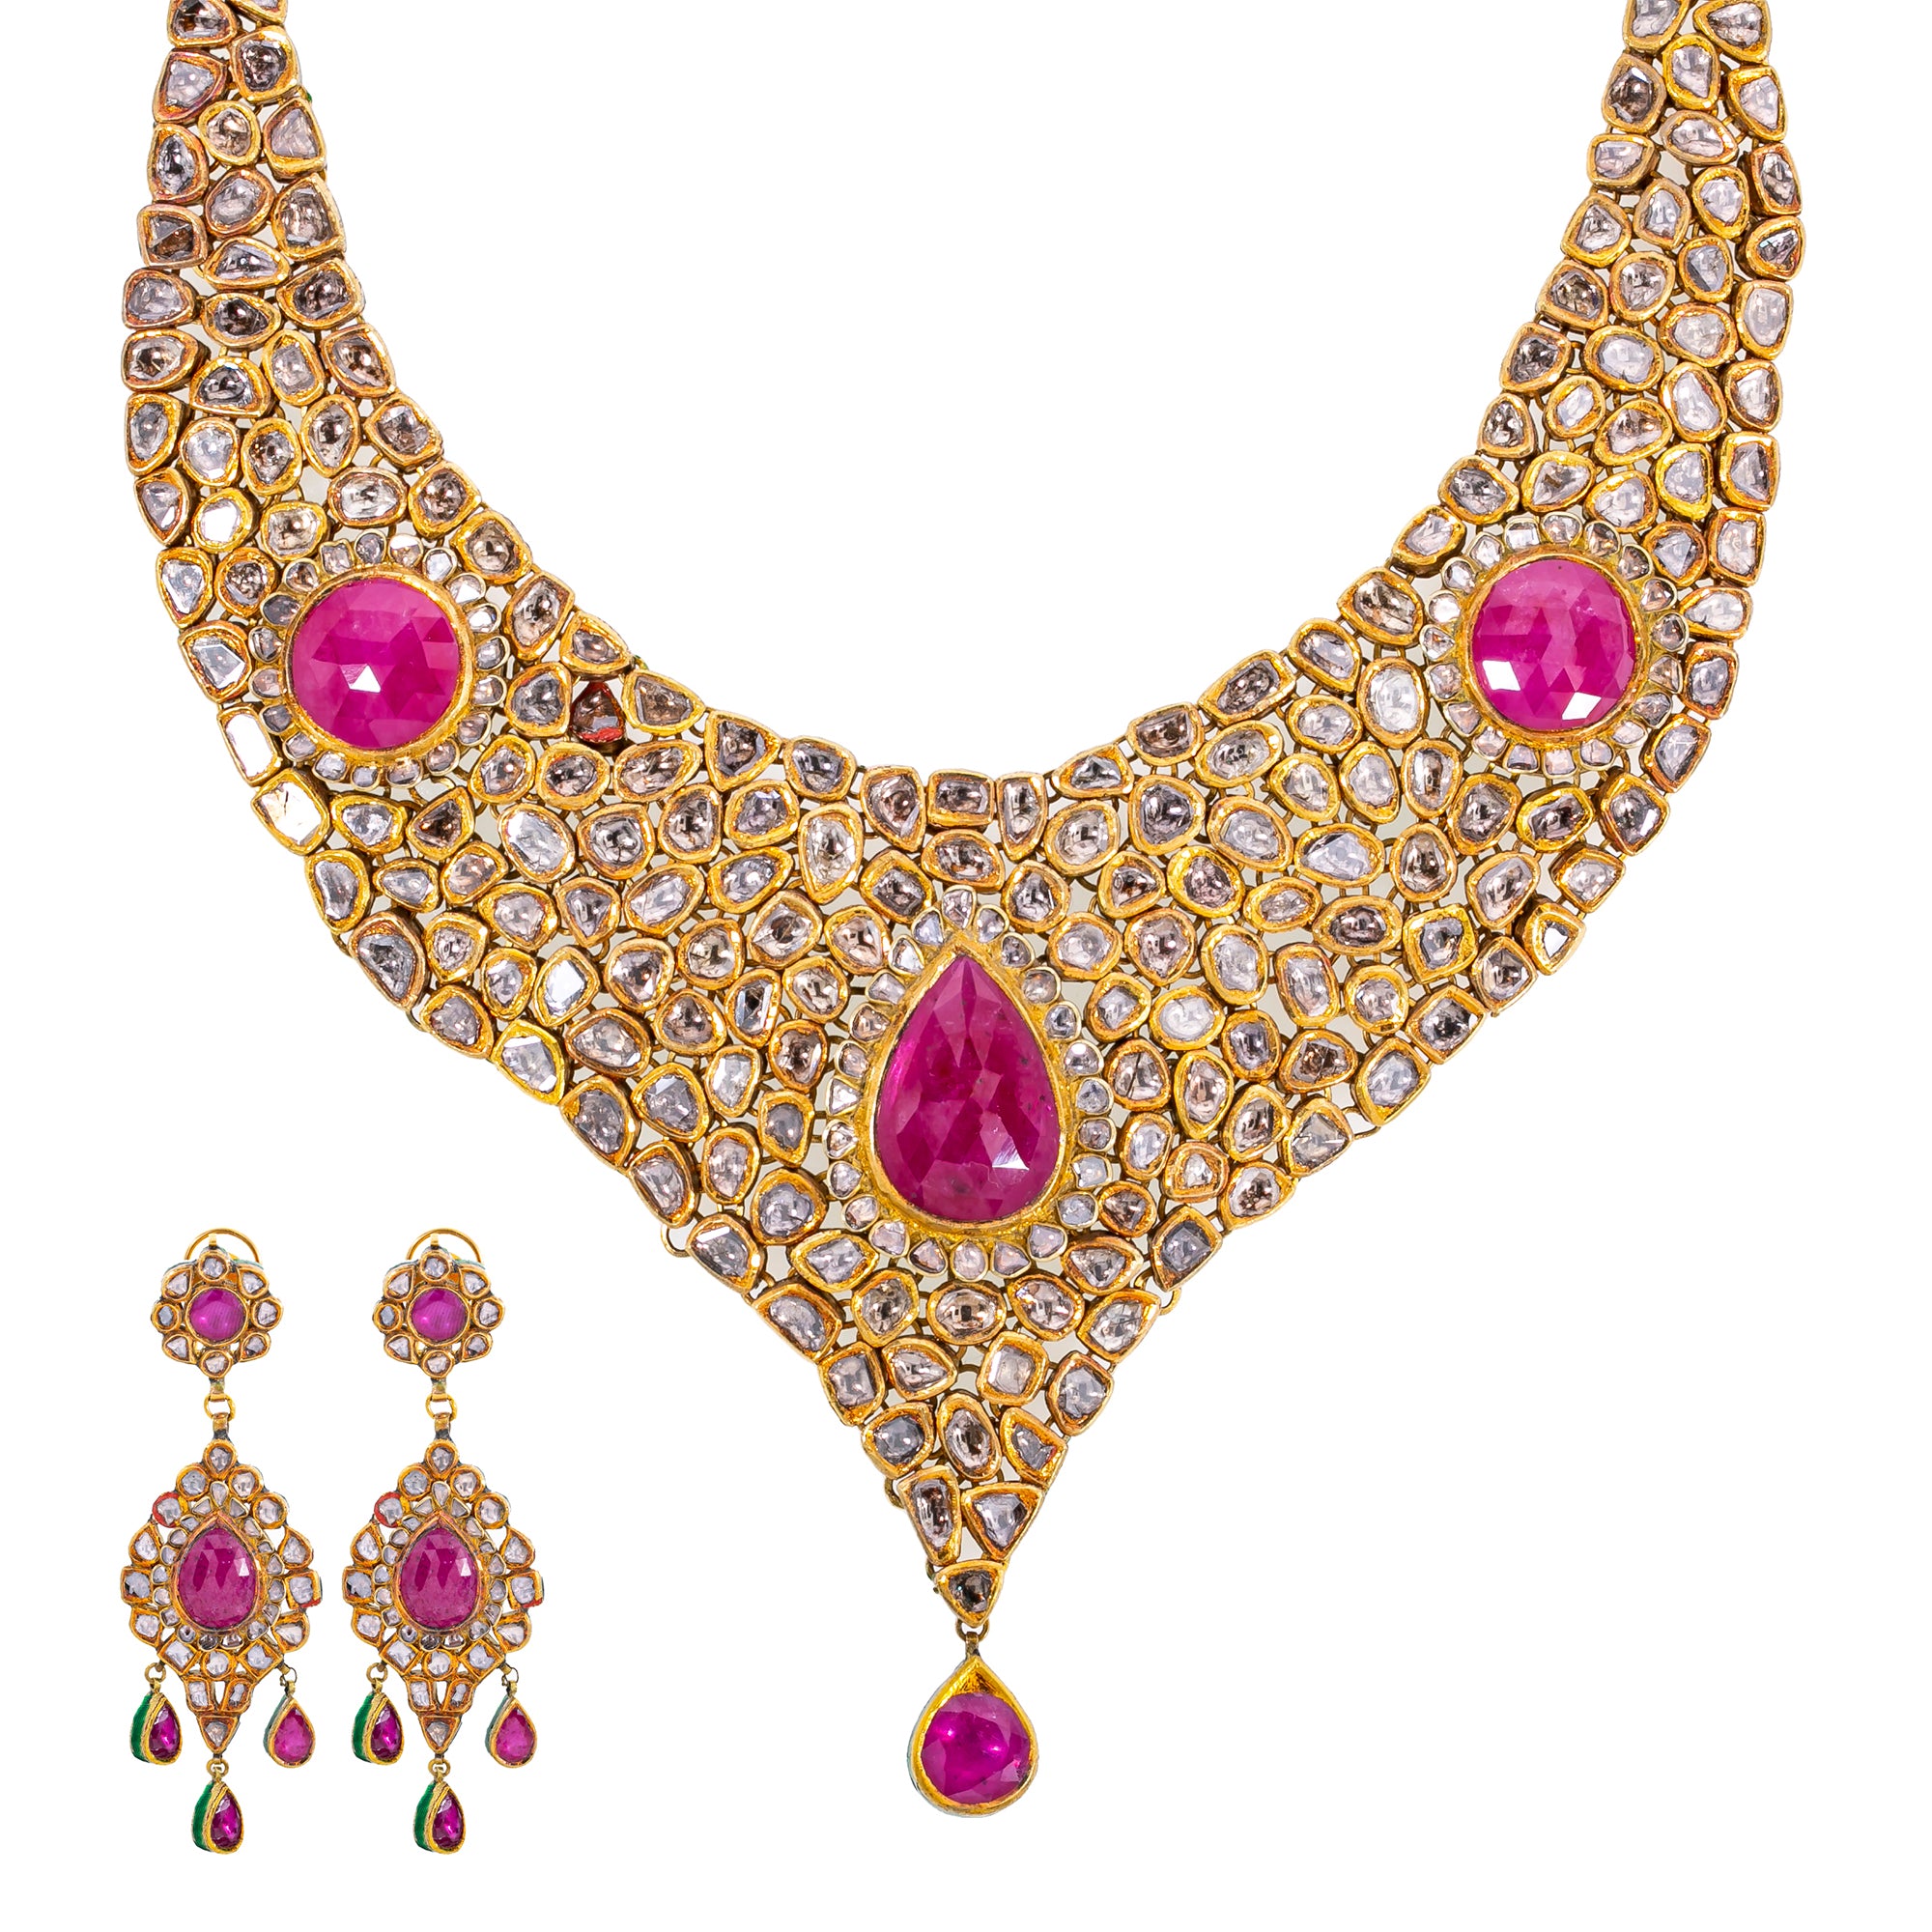 INDIAN JEWELRY / NECKLACE 273-